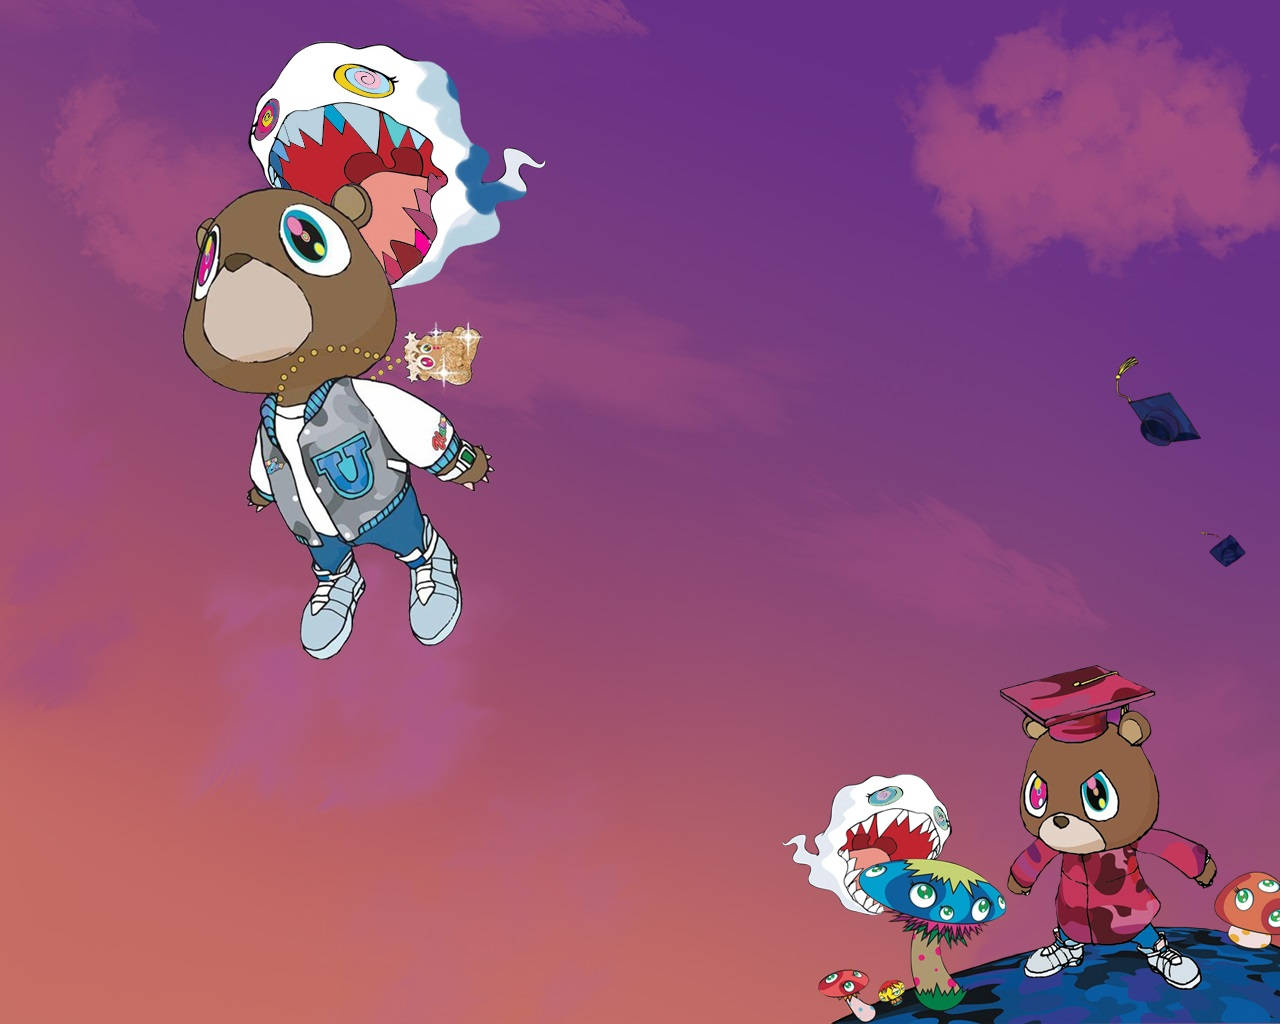 Kanye West Bear In Space With Angry Bear Wallpaper